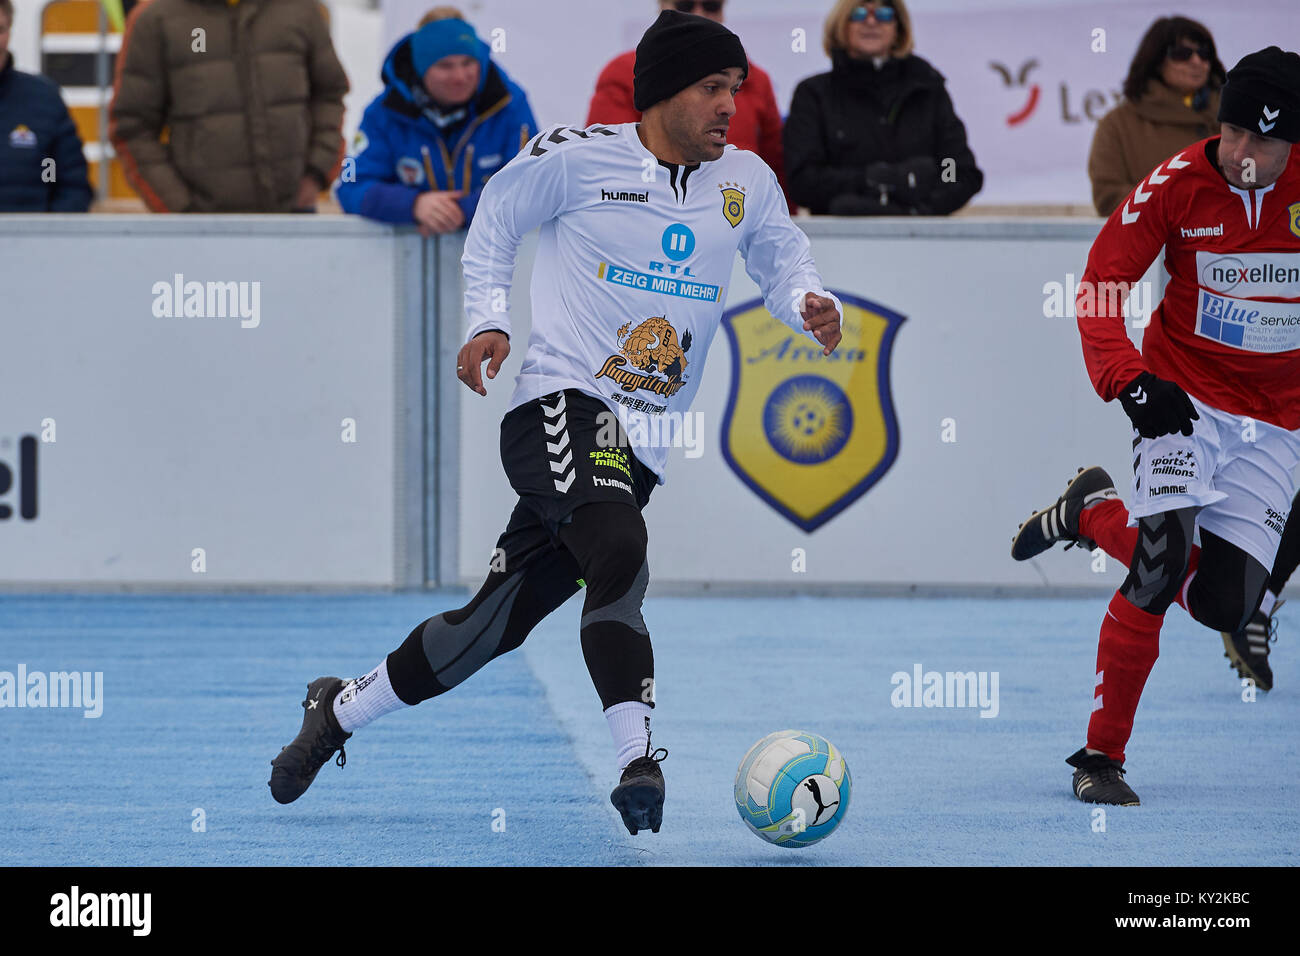 Arosa, Switzerland. 12th Jan, 2018. David Odonkor during the 8th unofficial  Ice Snow Football World Cup 2018 in Arosa. Credit: Rolf  Simeon/Proclaim/Alamy Live News Stock Photo - Alamy